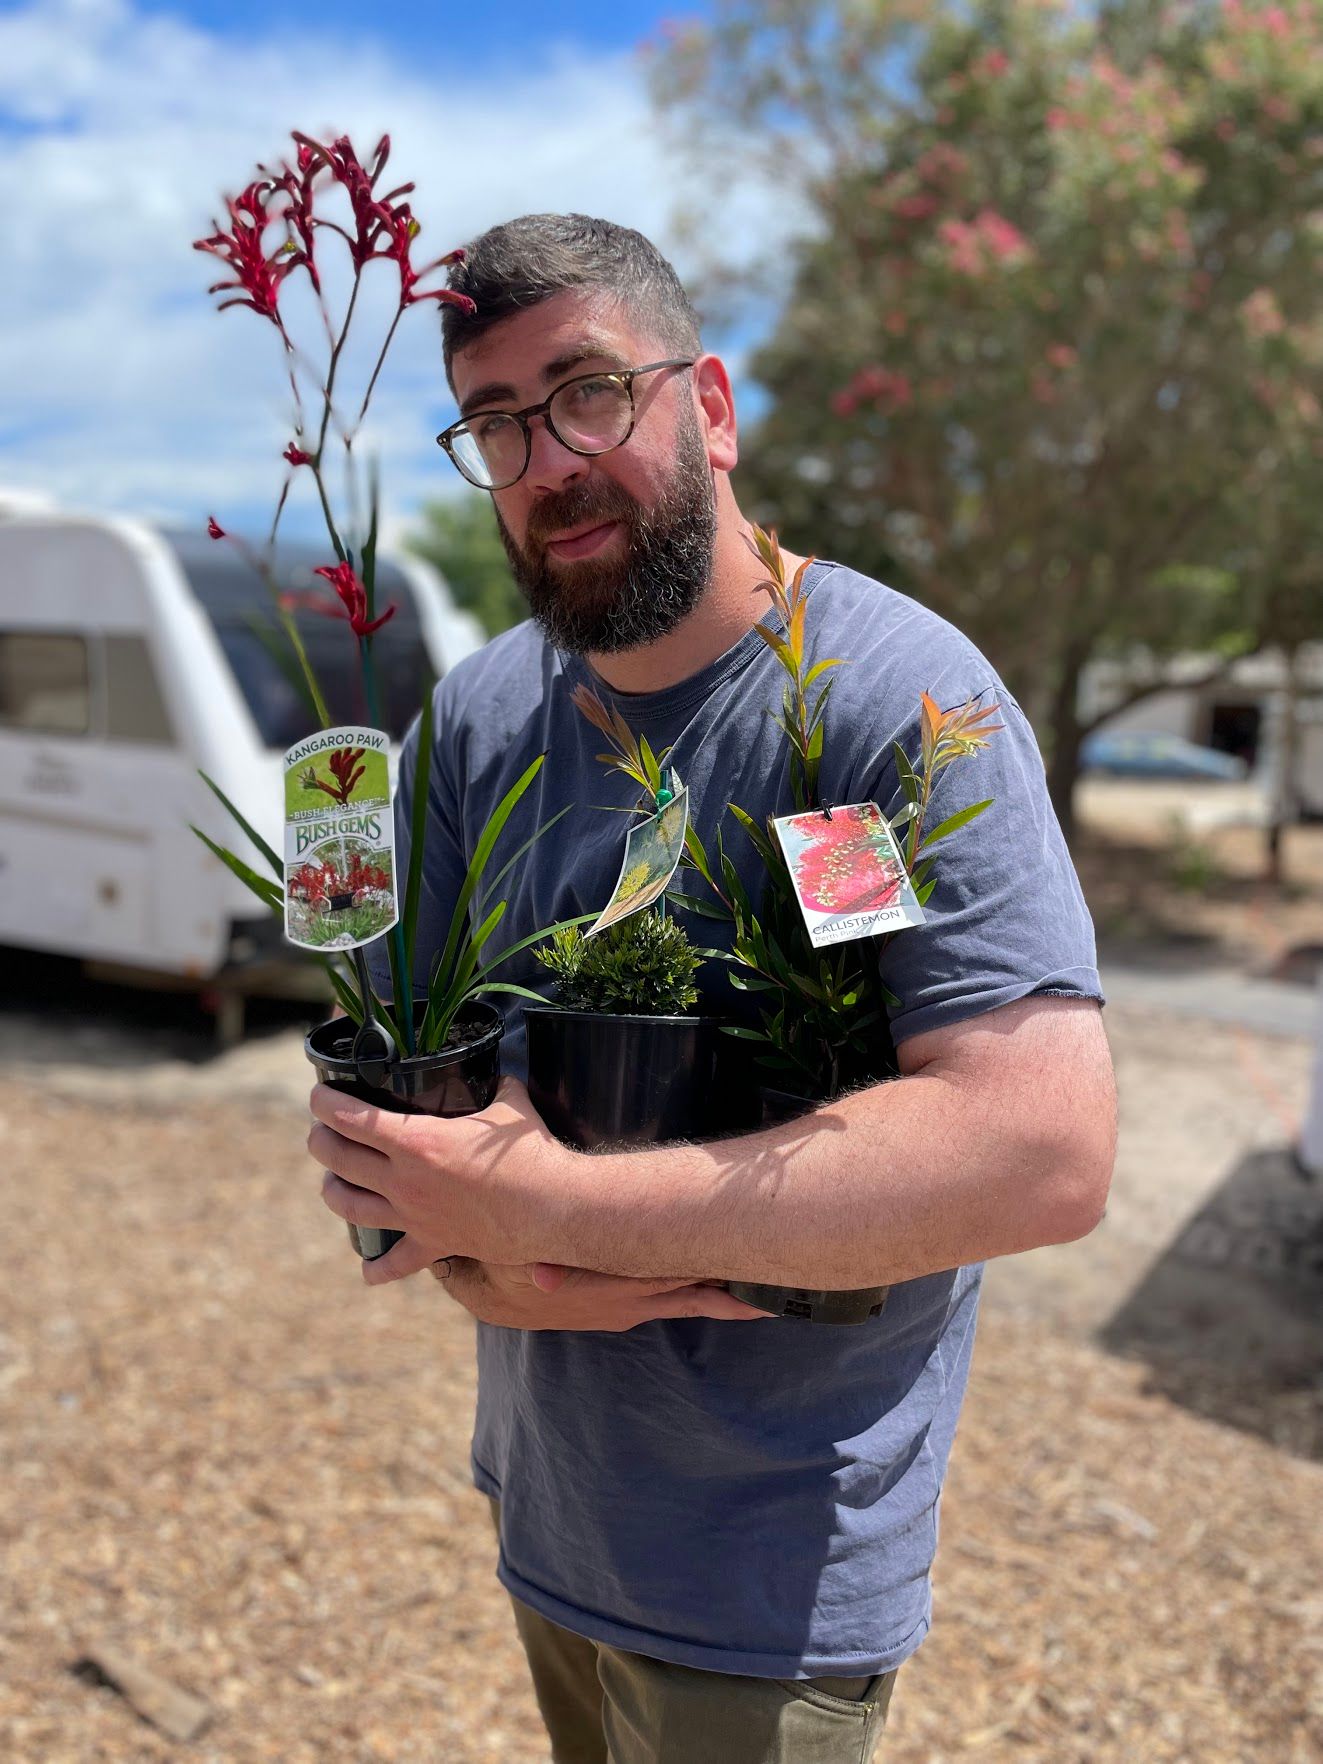 Cliniko's founder Joel with an armful of different plants in pots